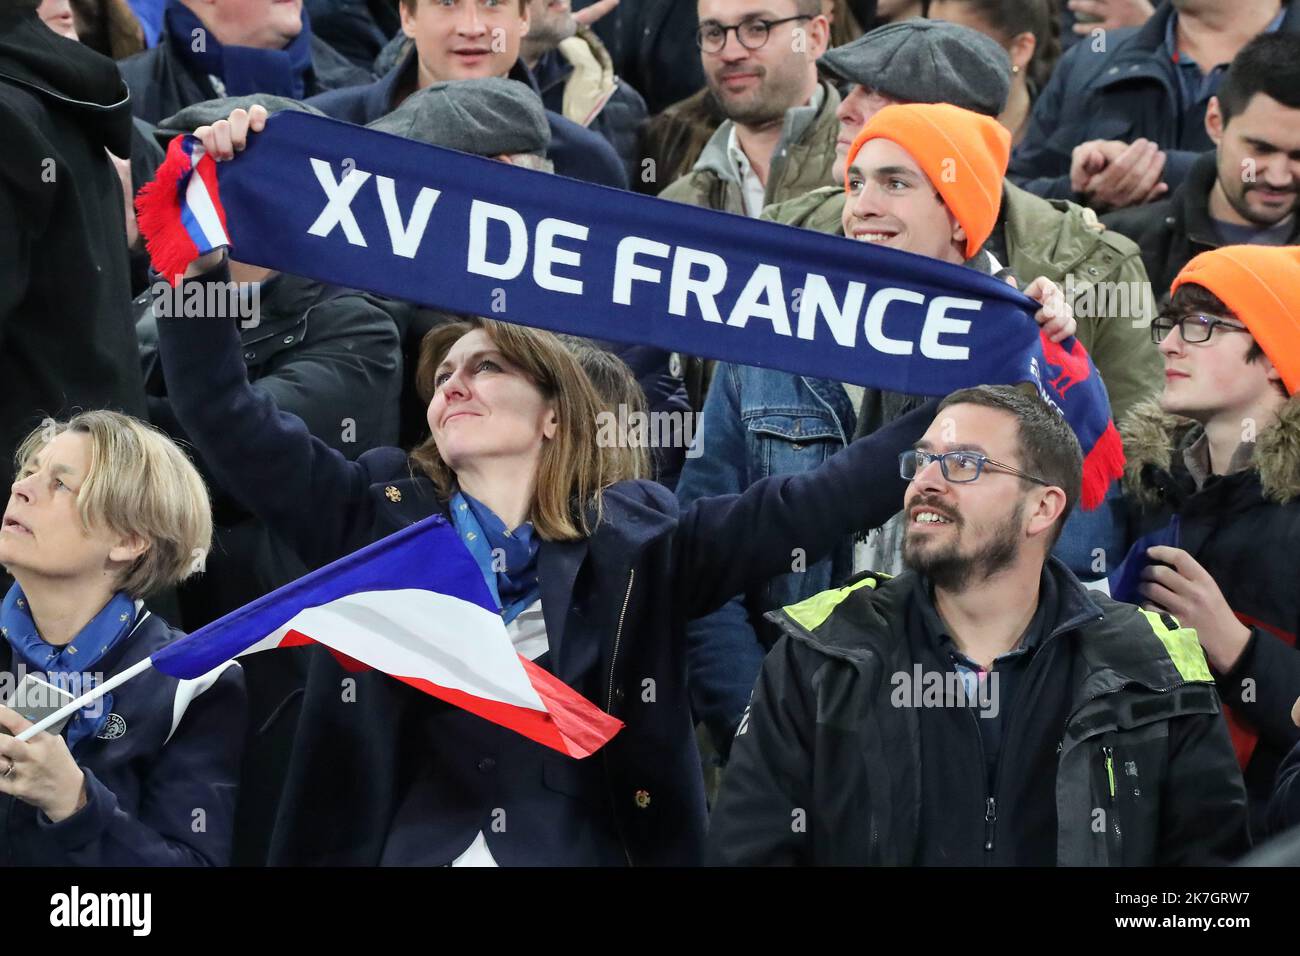 France-Angleterre : le match des supporters